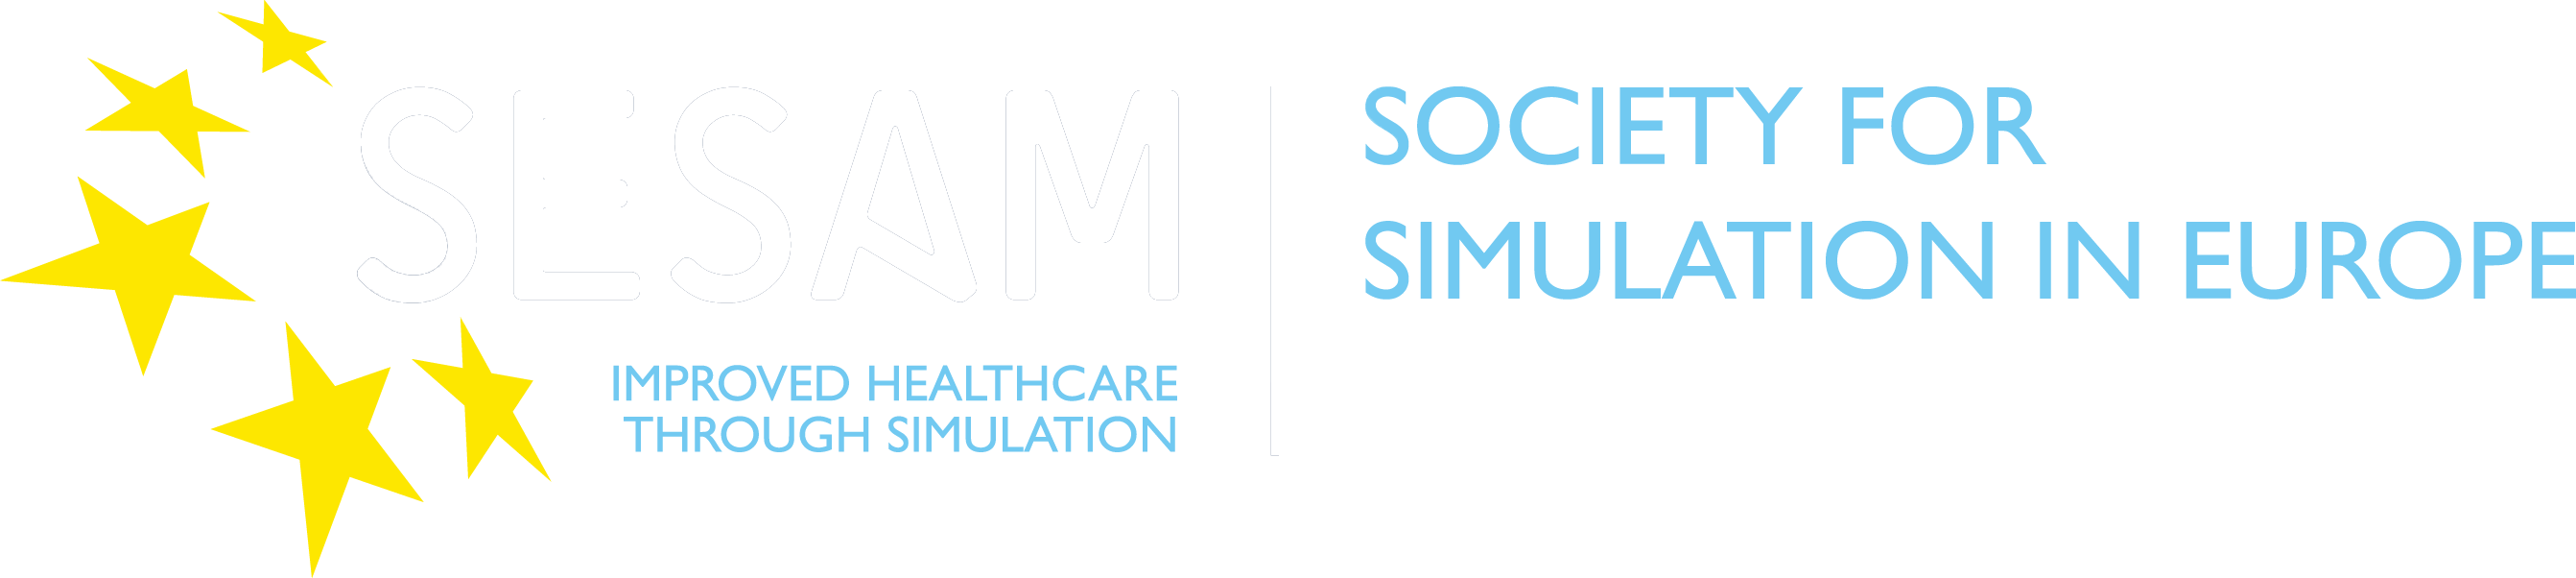 SESAM - Society in Europe for Simulation Applied to Medicine